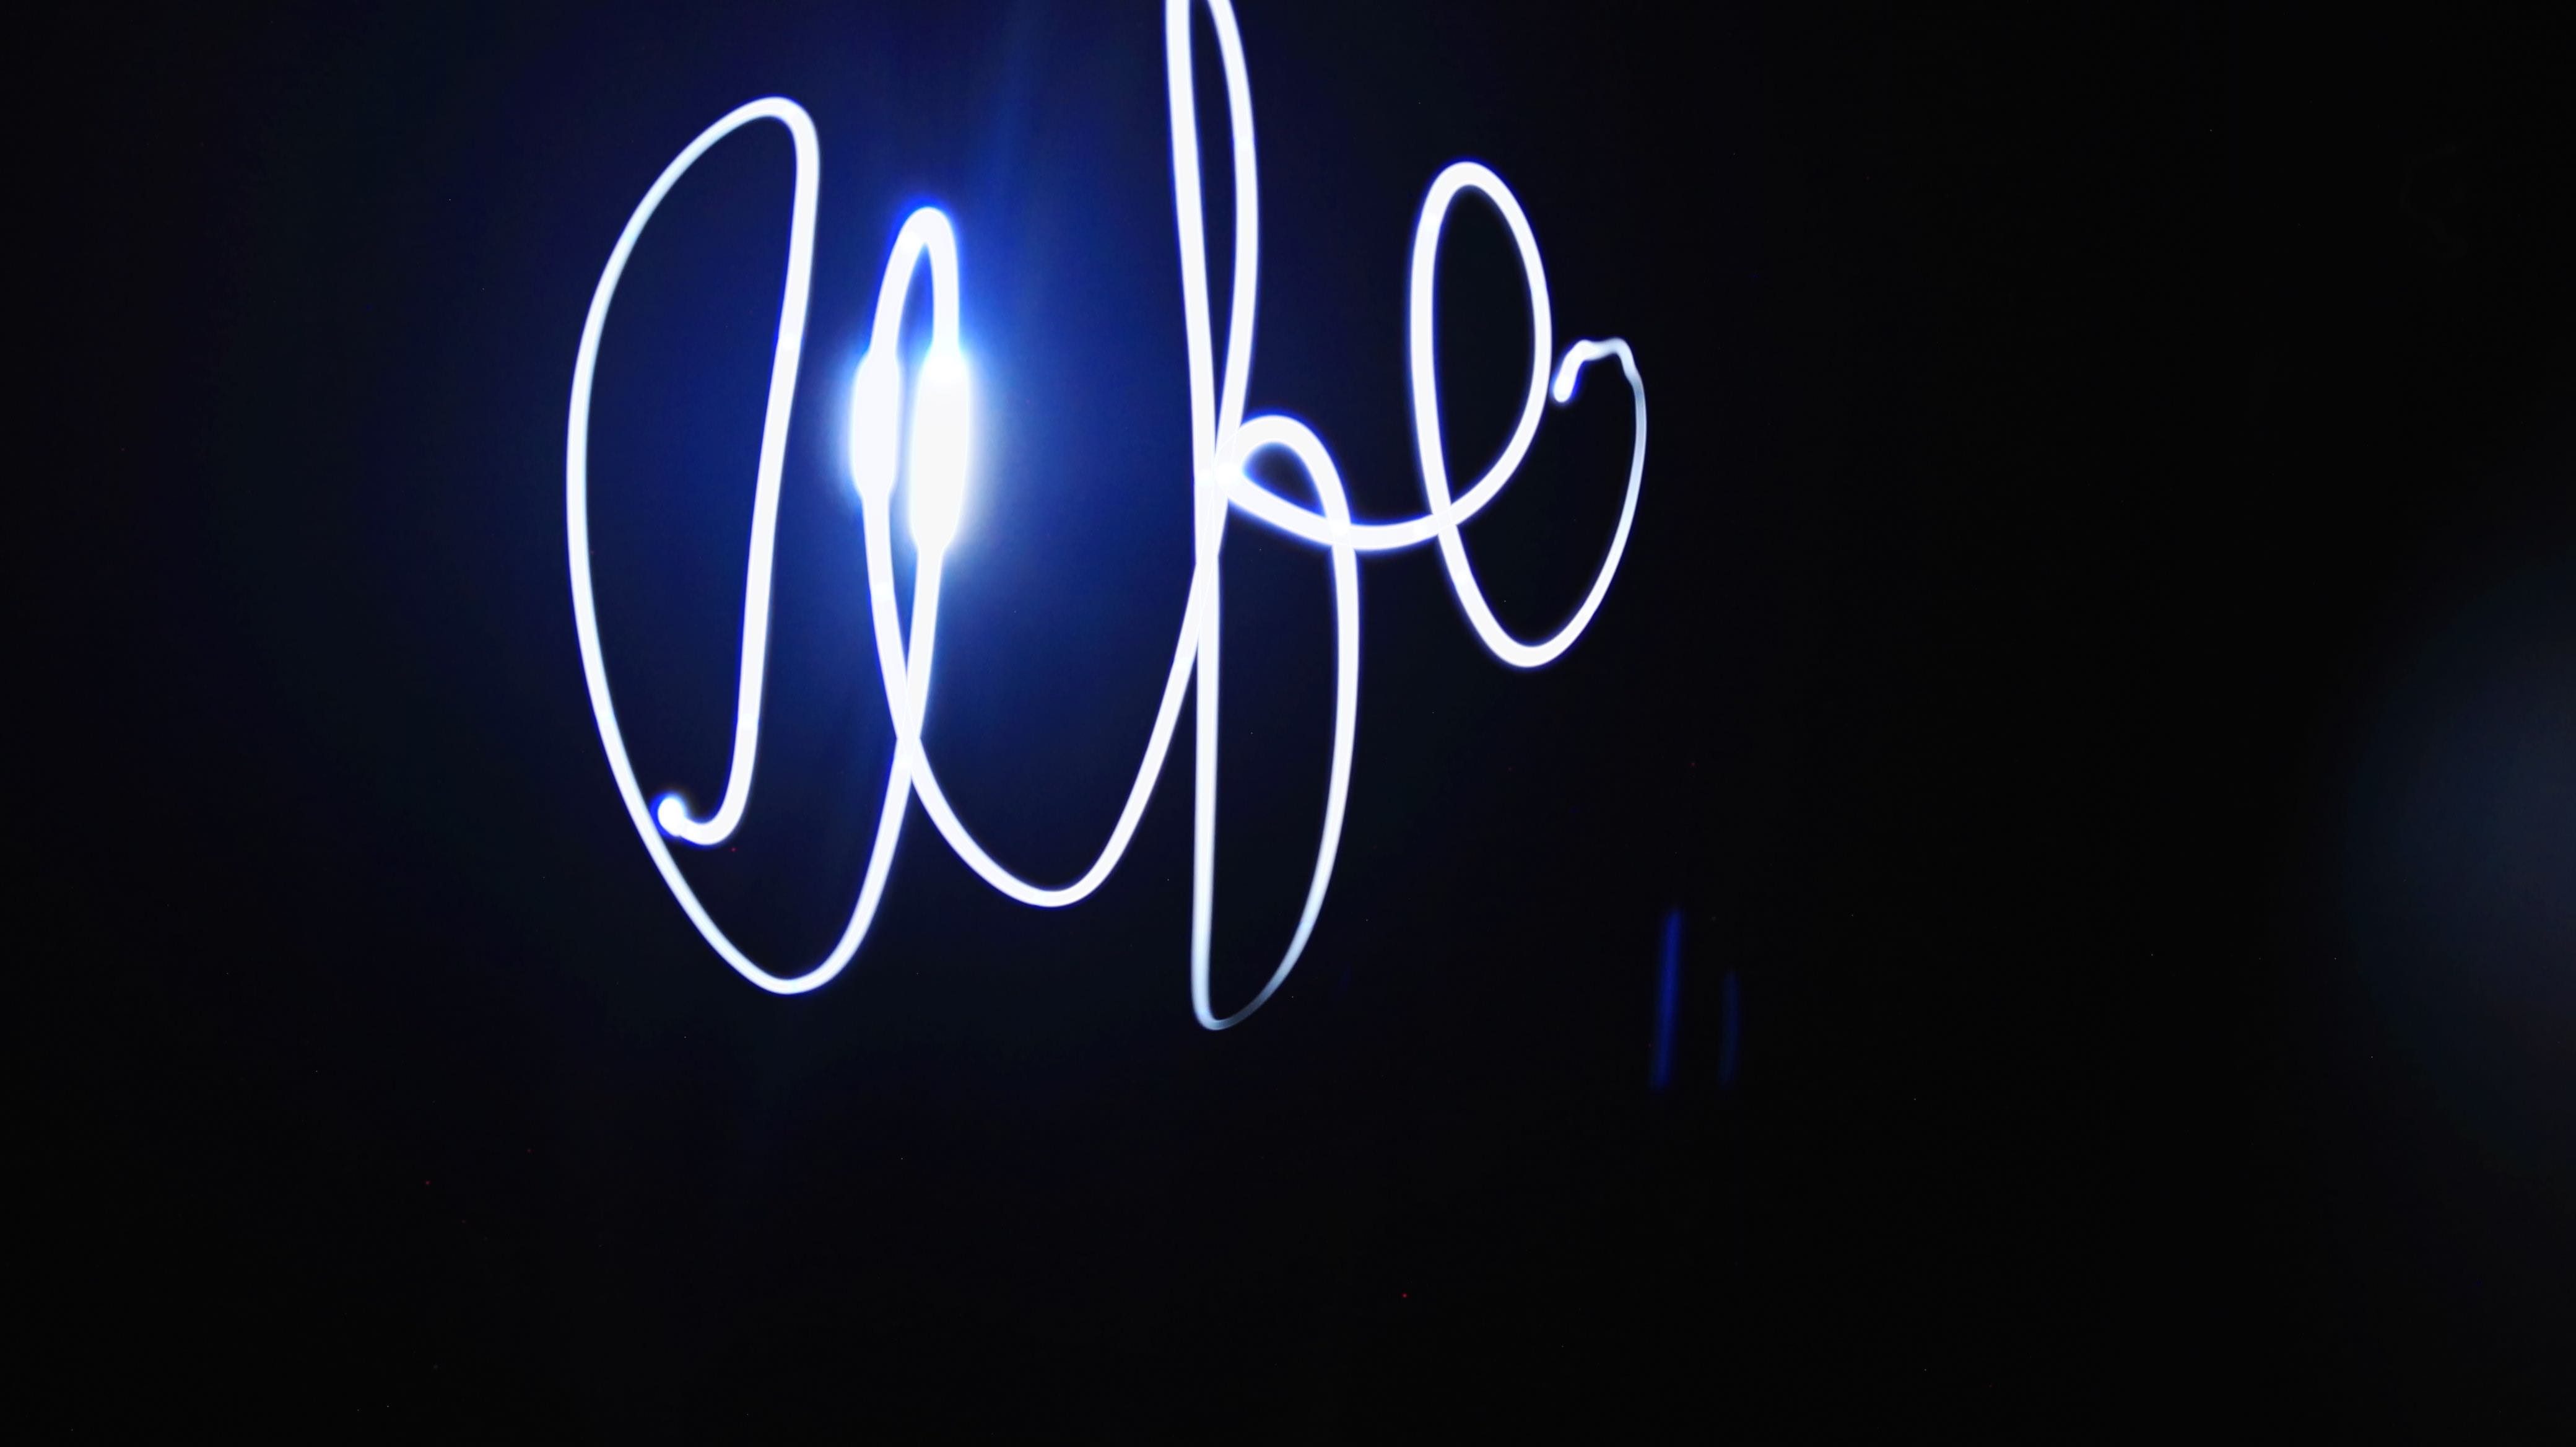 LIGHT UP LIFE. Light tagging taken using Light Painting mode with no filter. 